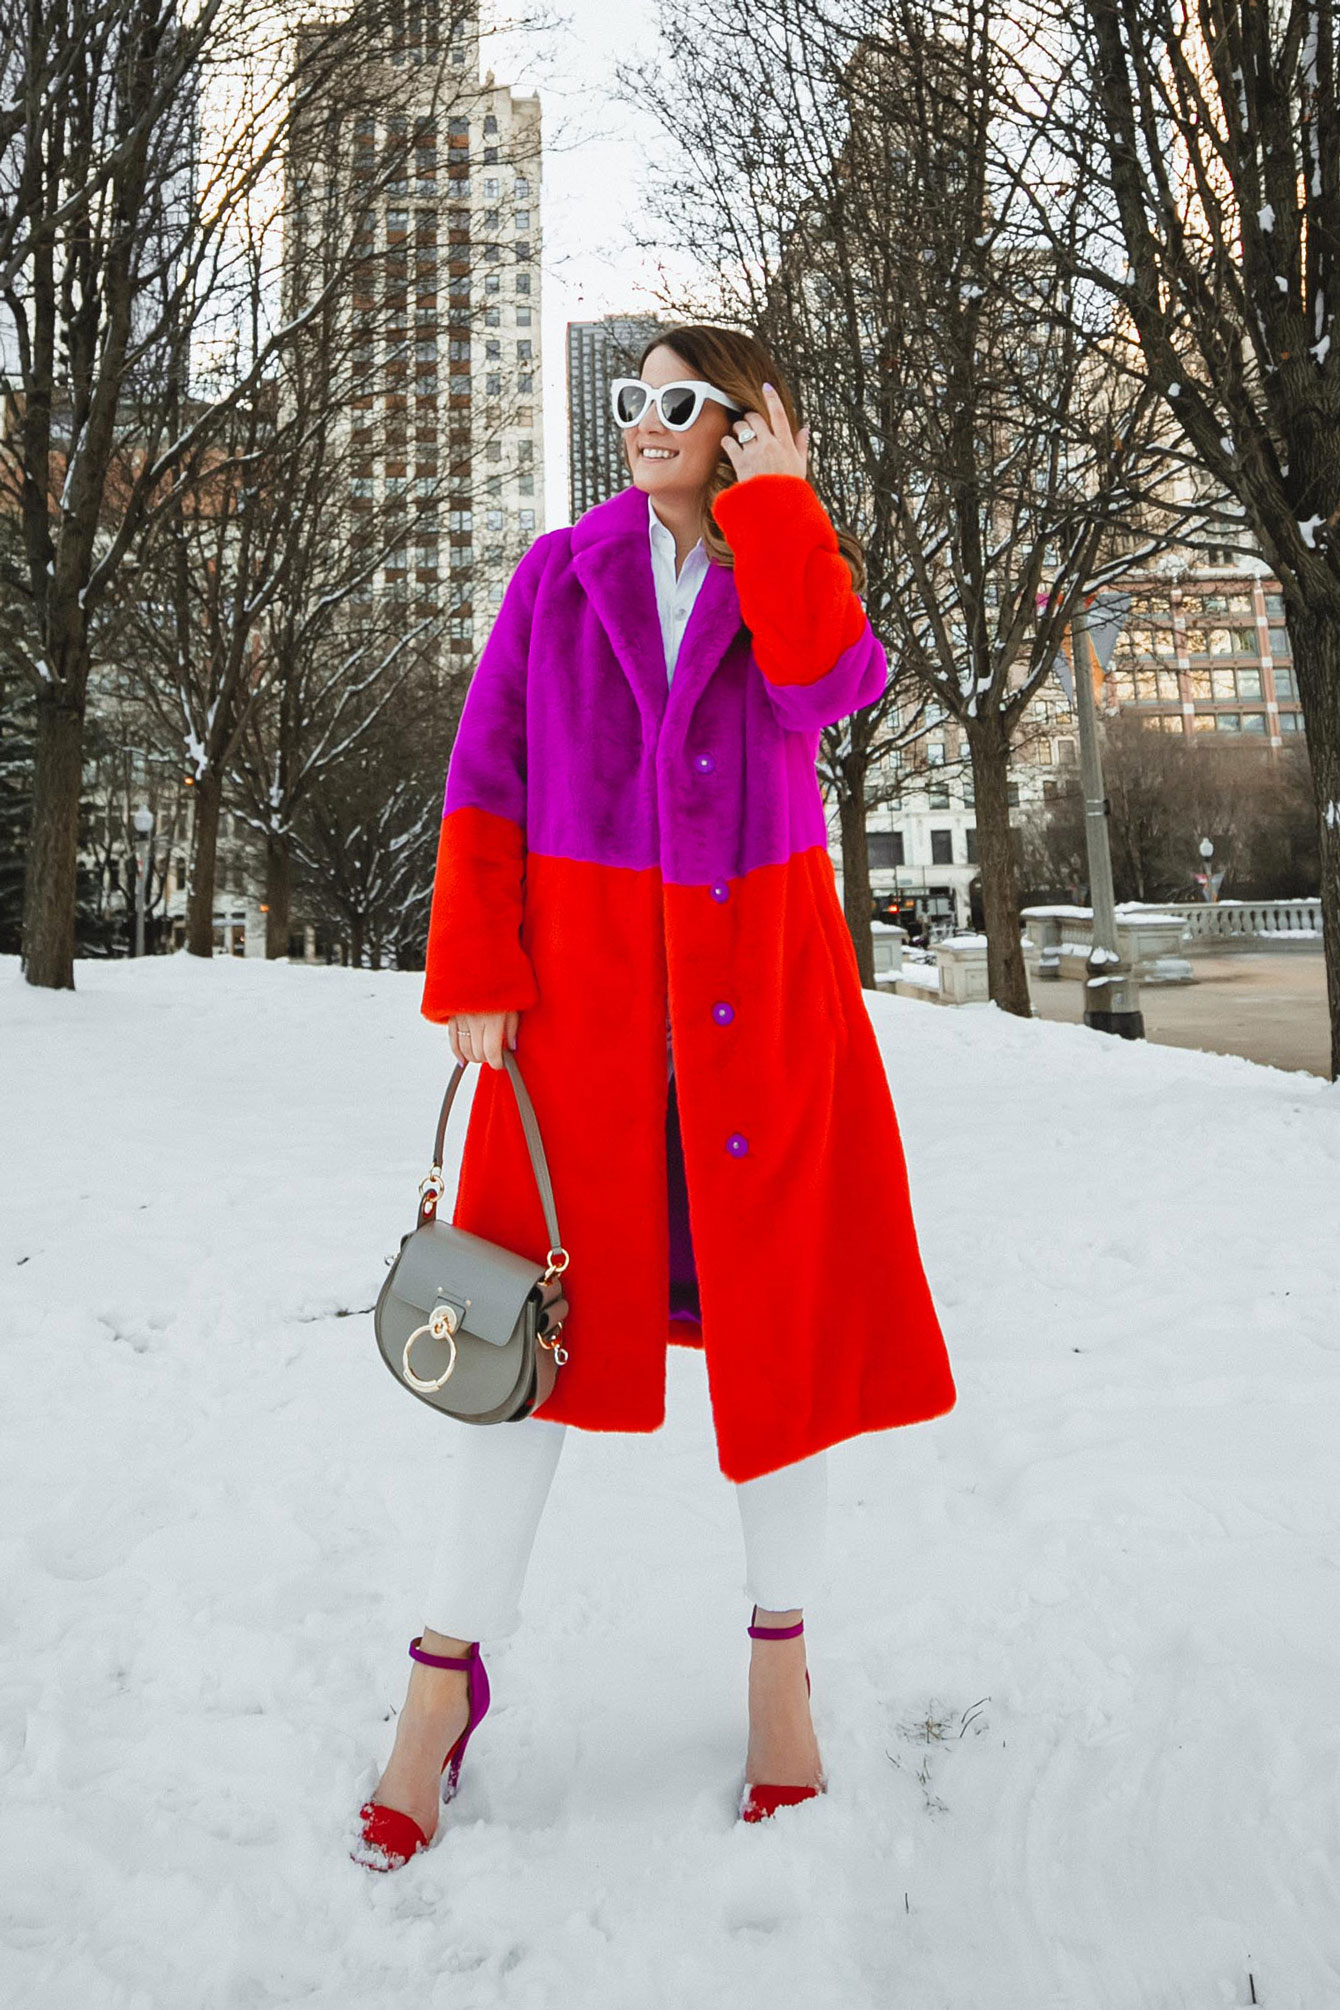 The Coziest Fur Coat and Chloe Tess Bag - Style Charade